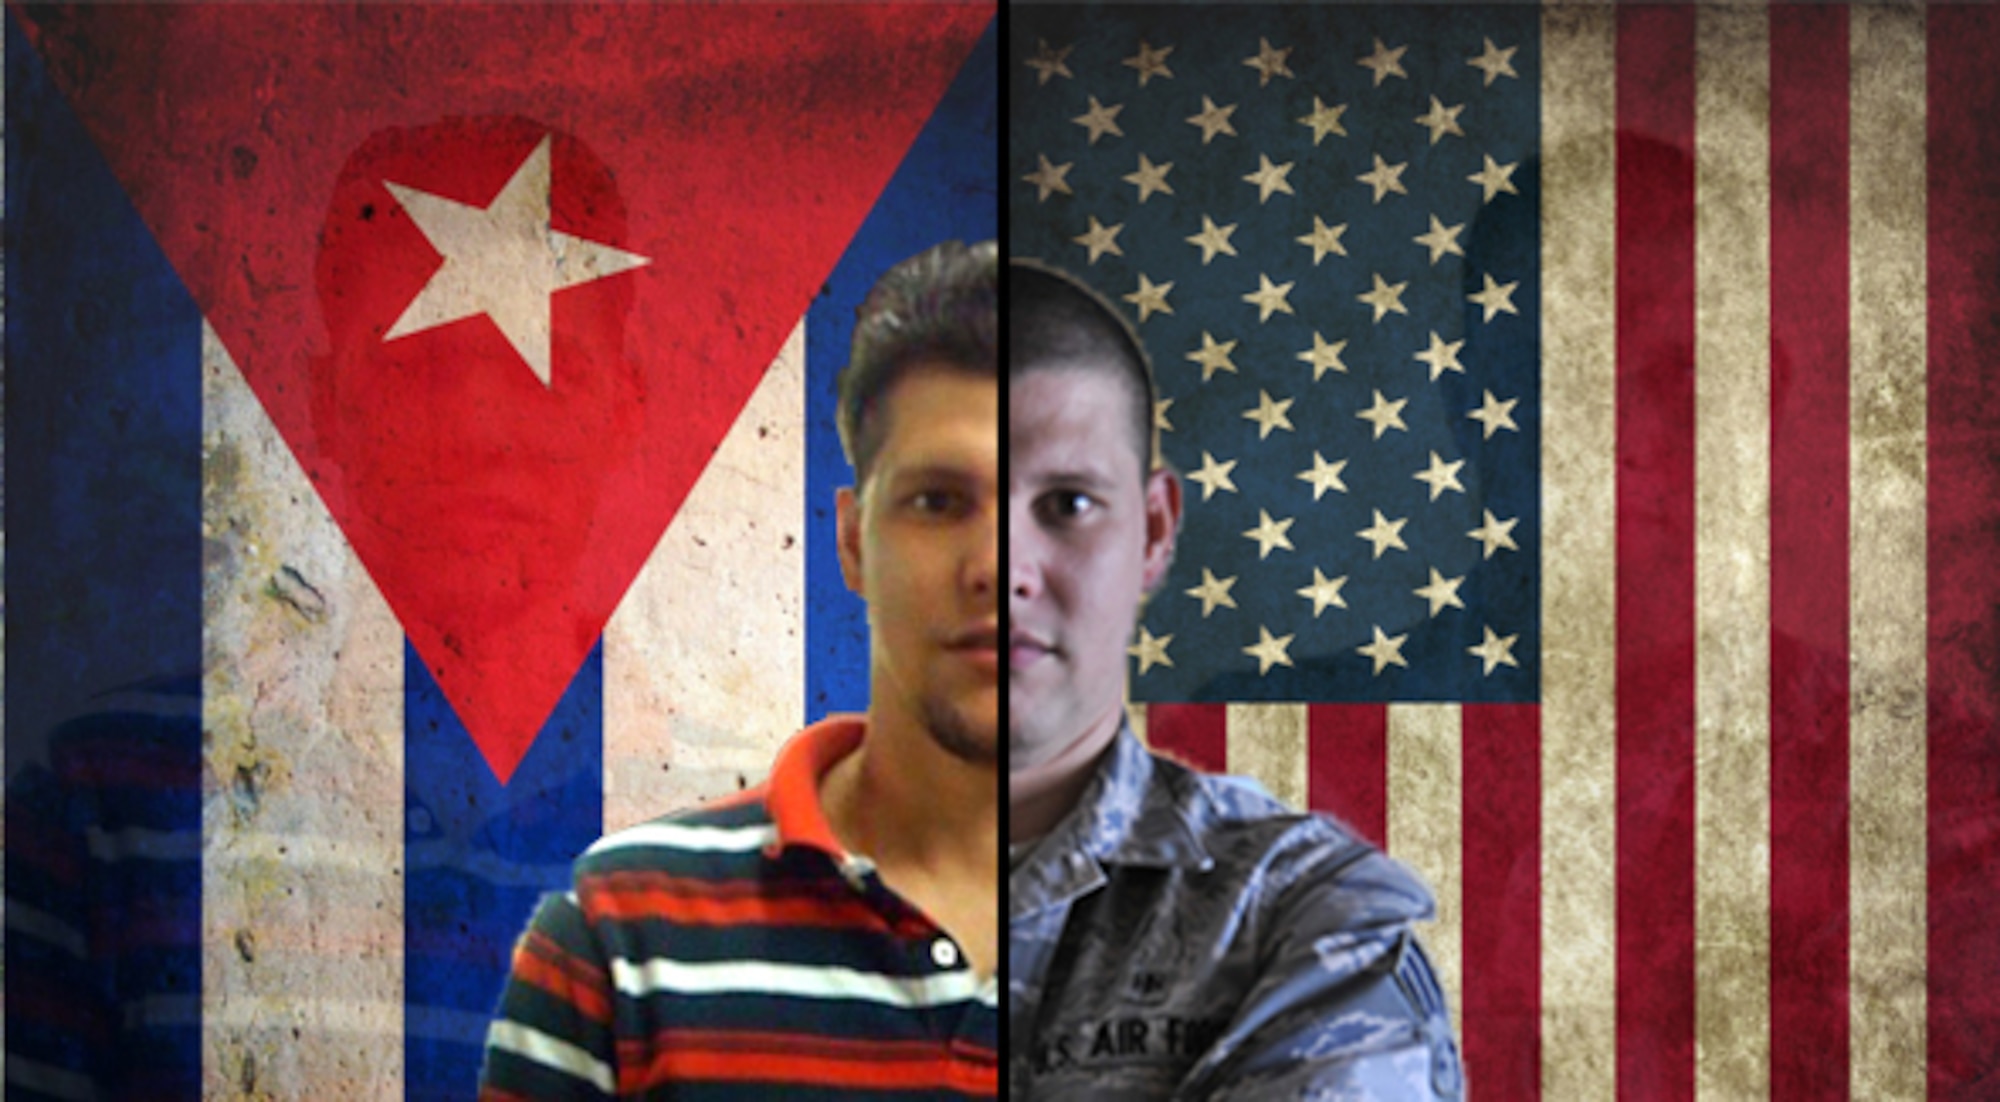 Senior Airman Osniel Diaz, 42nd Medical Group public health professional, came to the United States from Cuba. Diaz has since been granted U.S. citizenship. (U.S. Air Force illustration by Senior Airman Christopher Stoltz) 